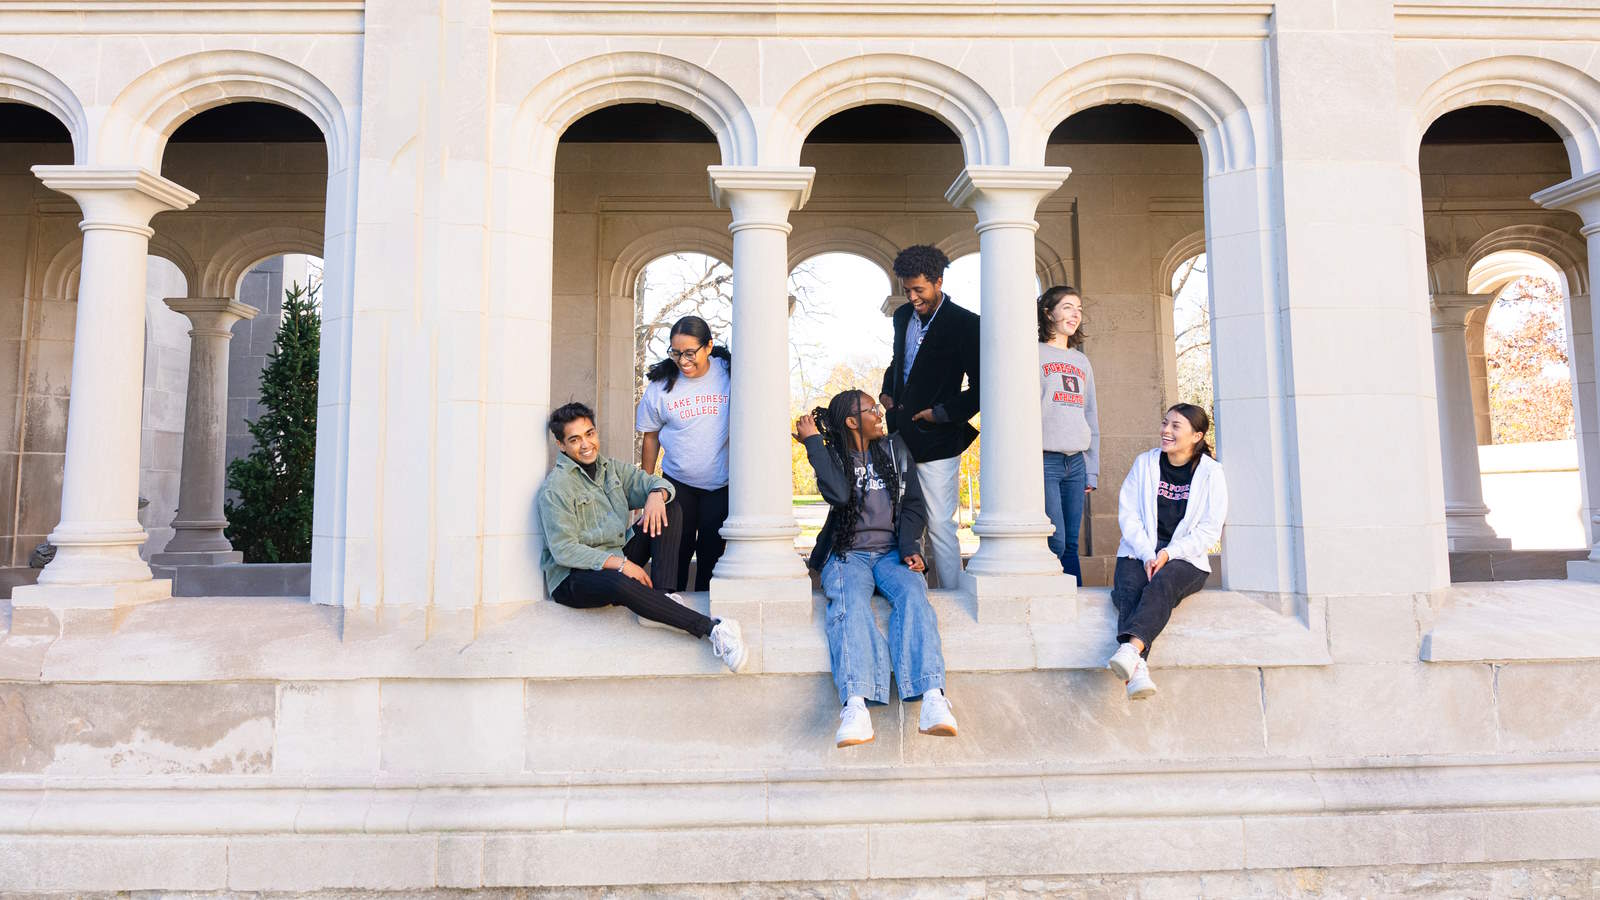 students standing and talking in a group of columns outdoors